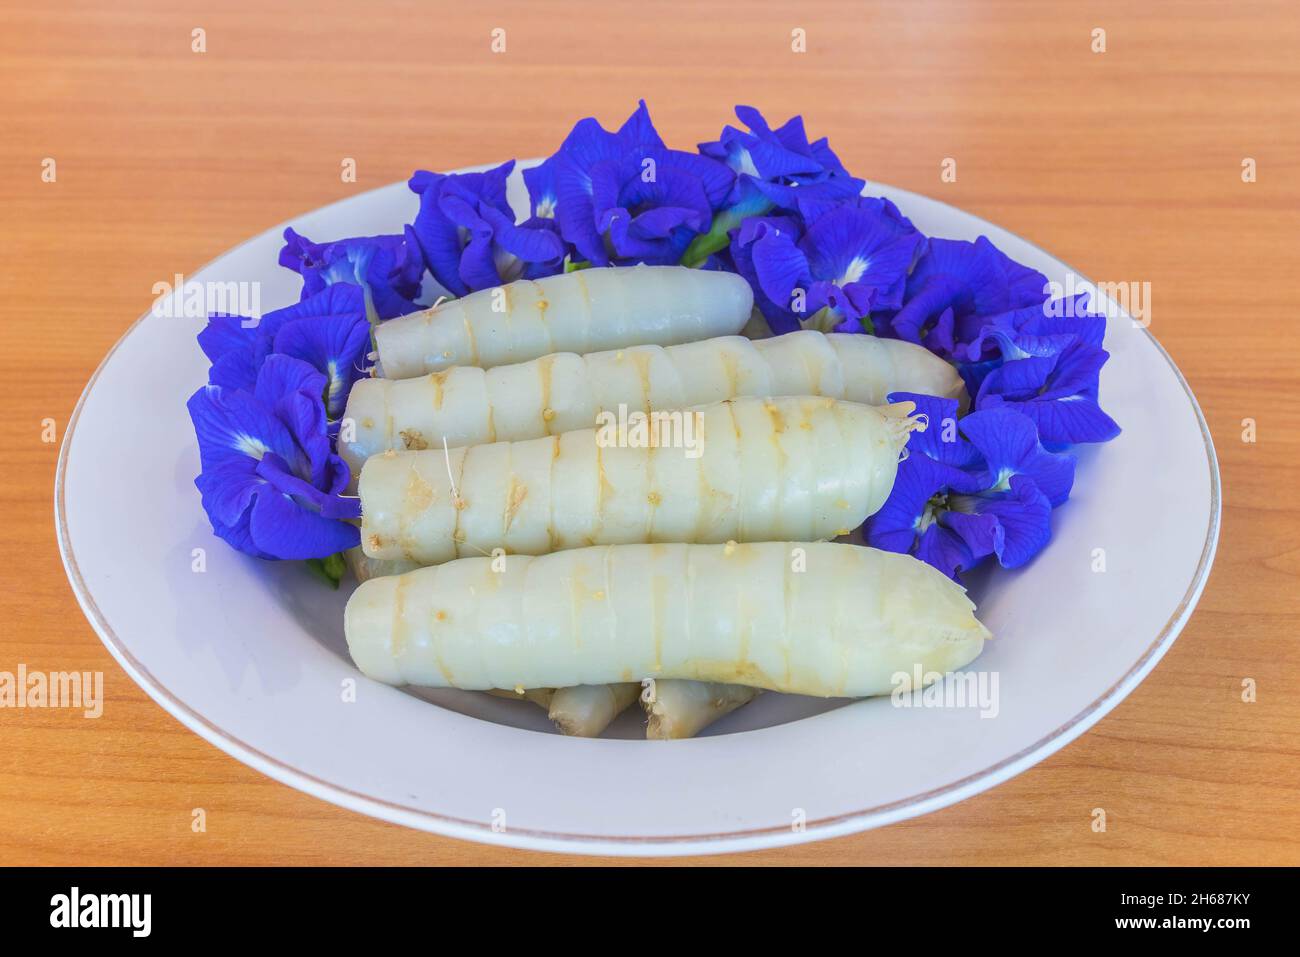 West Indian Arrowroot,Maranta arundinacea,Canna indica,Australian arrowroot with Blue Pea, Butterfly Pea,flower,Thailand herb on the plate. Stock Photo